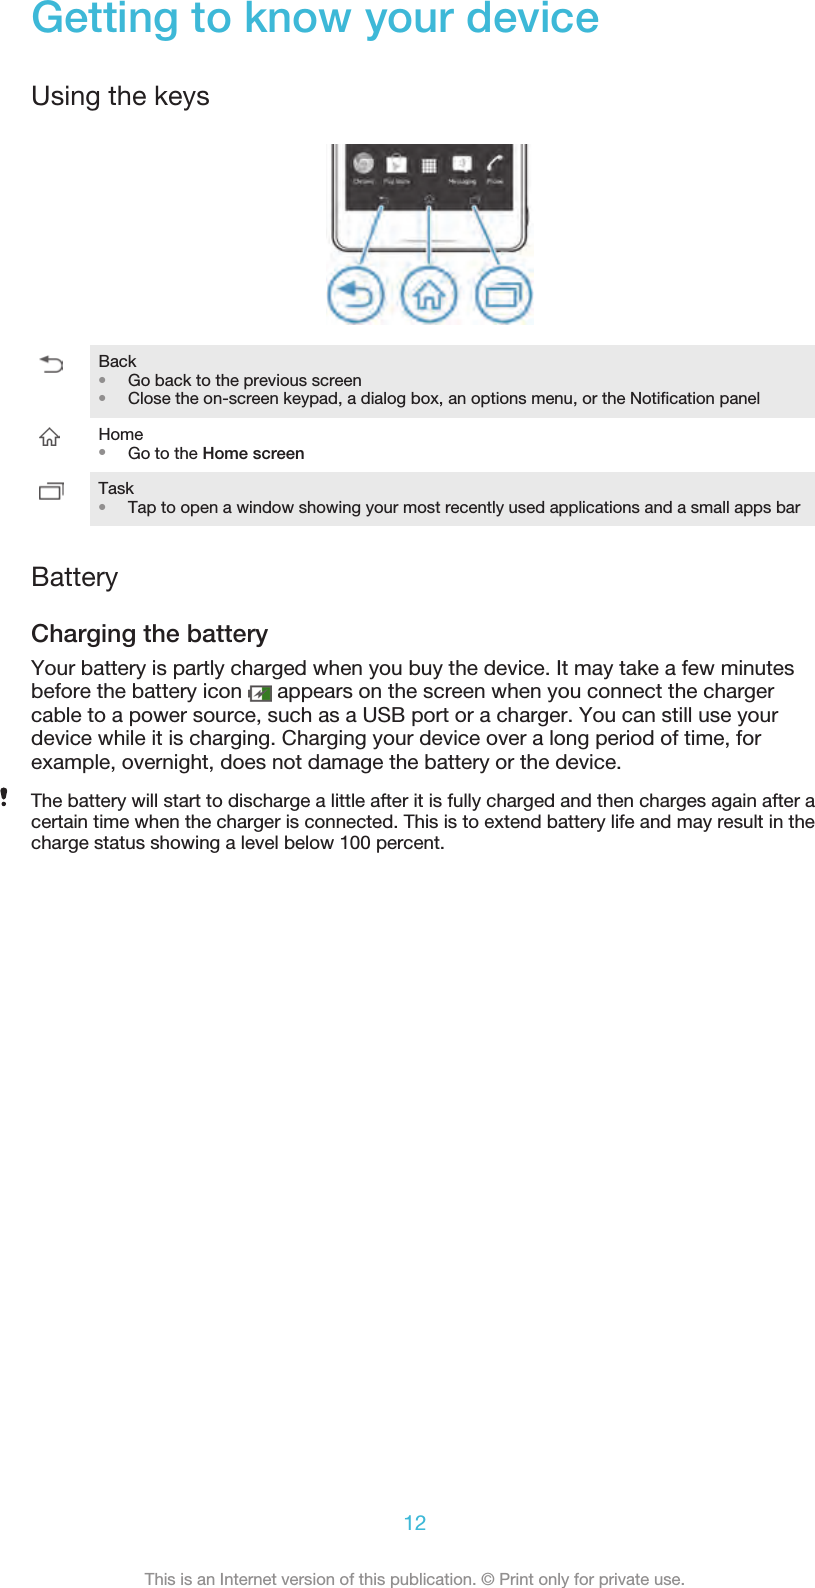 Getting to know your deviceUsing the keysBack•Go back to the previous screen•Close the on-screen keypad, a dialog box, an options menu, or the Notification panelHome•Go to the Home screenTask•Tap to open a window showing your most recently used applications and a small apps barBatteryCharging the batteryYour battery is partly charged when you buy the device. It may take a few minutesbefore the battery icon   appears on the screen when you connect the chargercable to a power source, such as a USB port or a charger. You can still use yourdevice while it is charging. Charging your device over a long period of time, forexample, overnight, does not damage the battery or the device.The battery will start to discharge a little after it is fully charged and then charges again after acertain time when the charger is connected. This is to extend battery life and may result in thecharge status showing a level below 100 percent.12This is an Internet version of this publication. © Print only for private use.